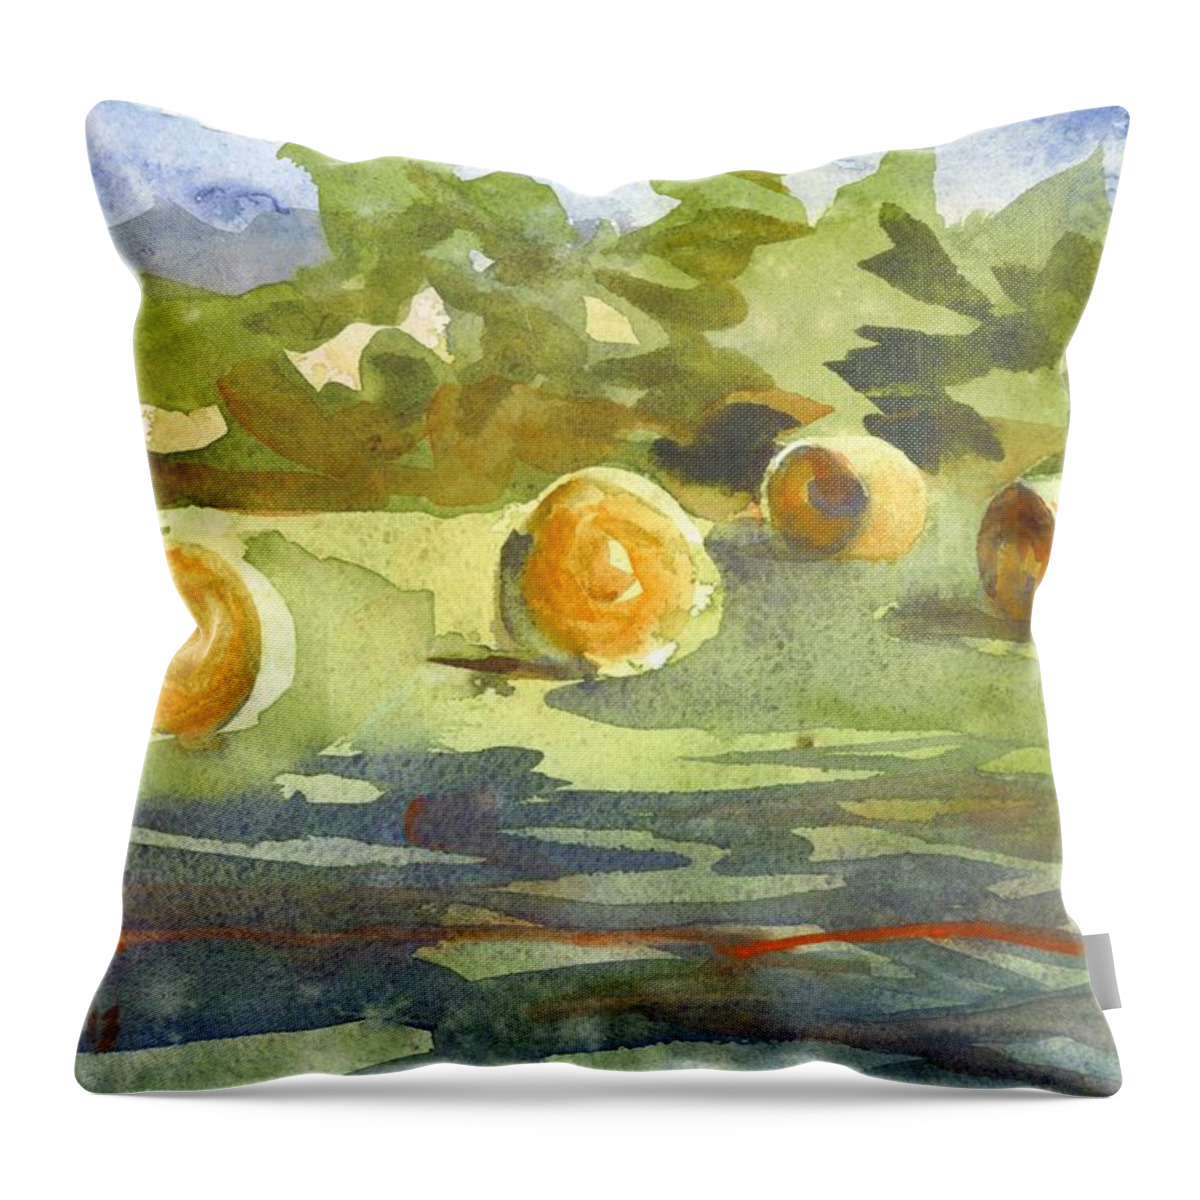 Misty Morning Gold Throw Pillow featuring the painting Misty Morning Gold by Kip DeVore